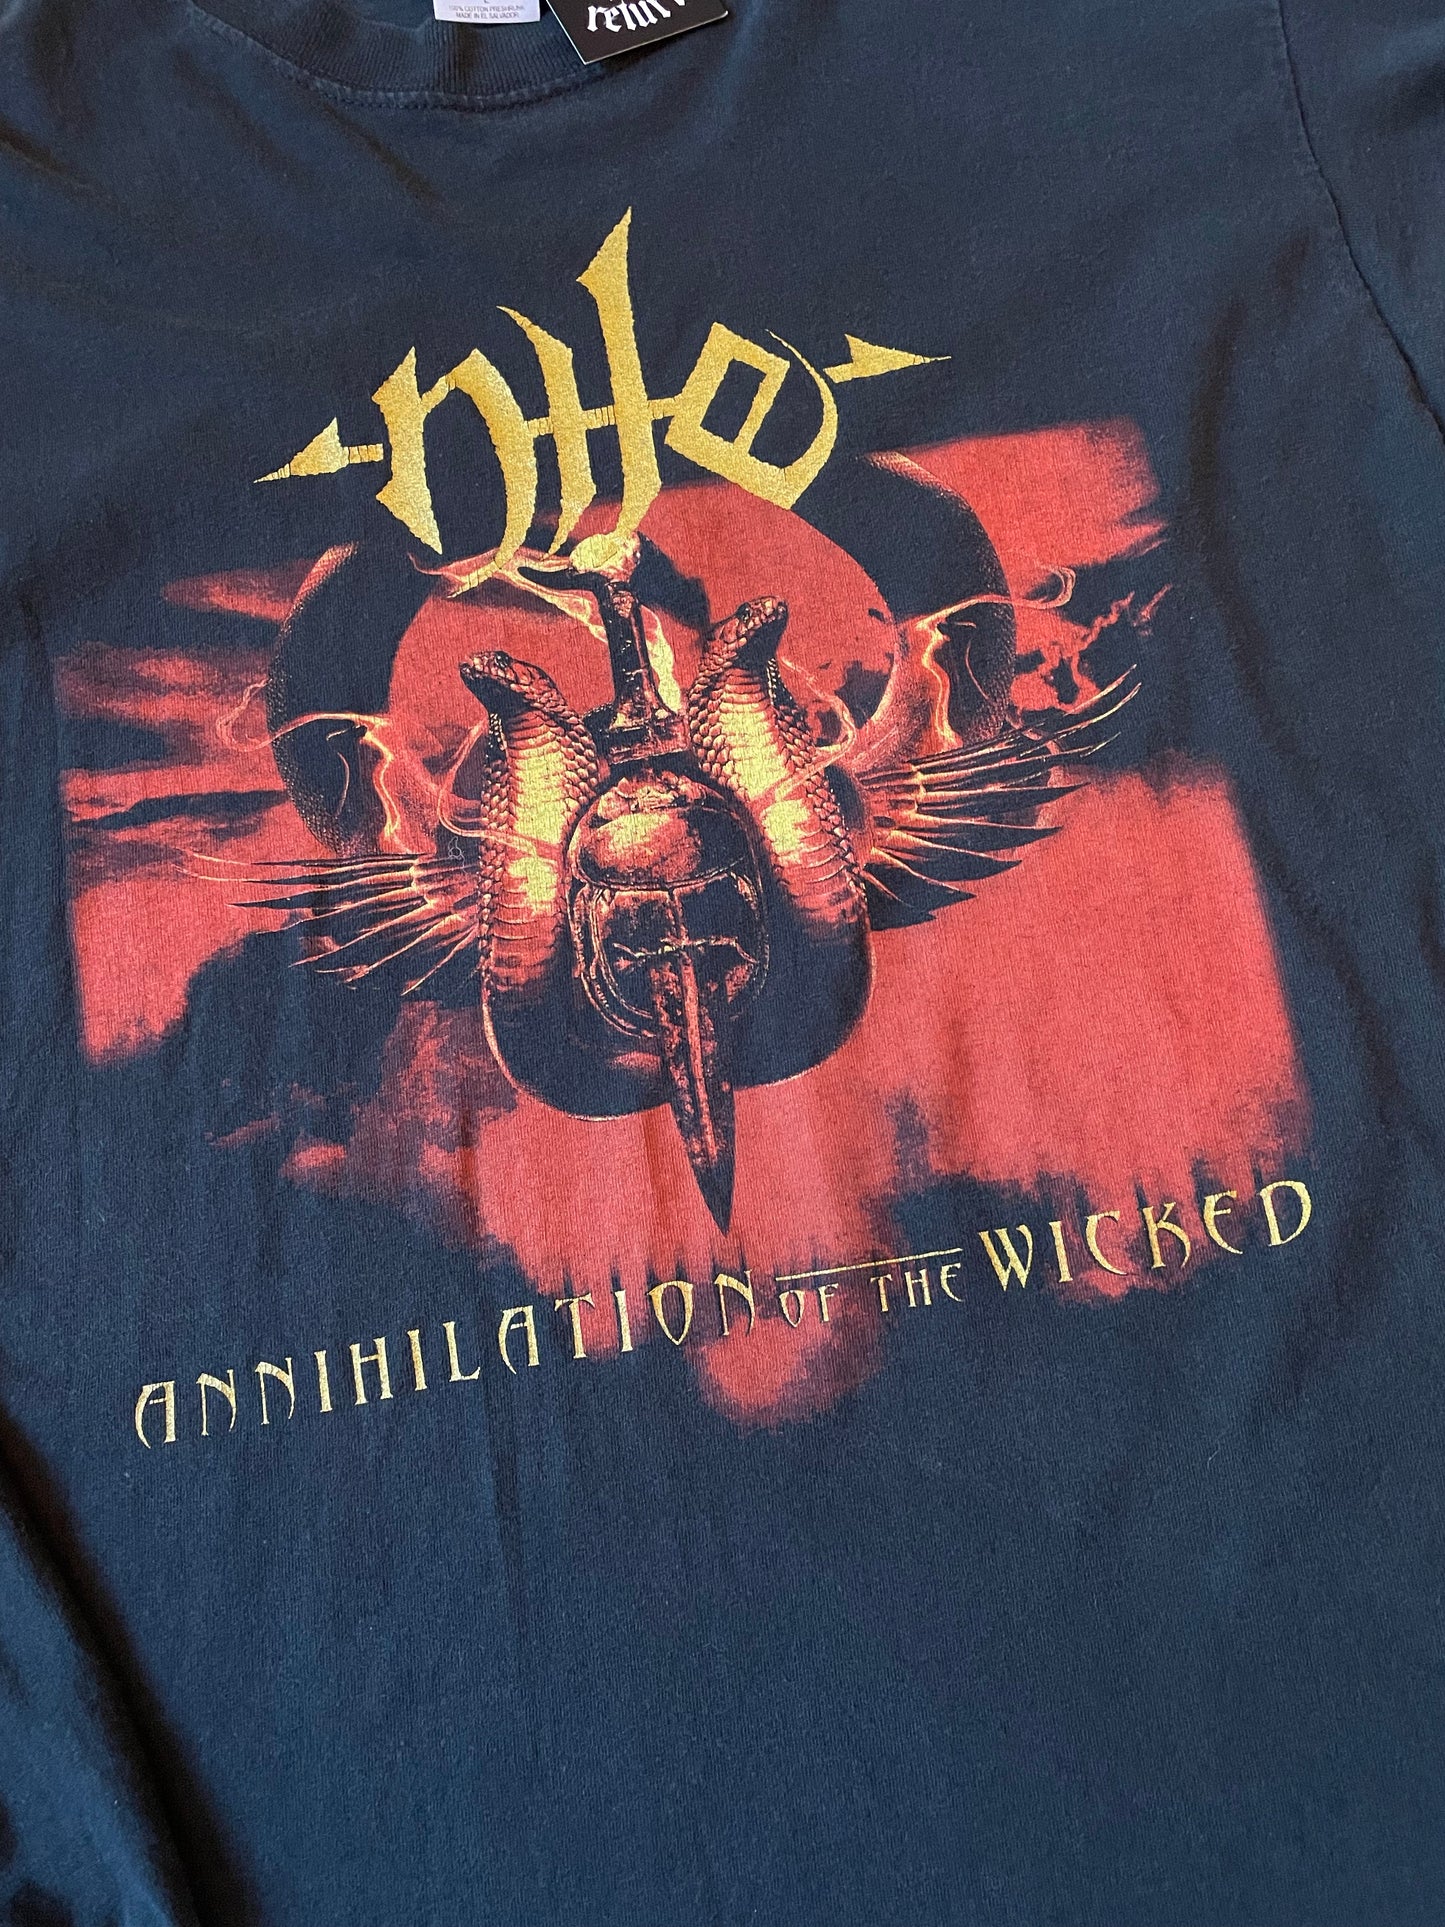 2005 Nile Annihilation Of The Wicked Tour Long Sleeve T-Shirt